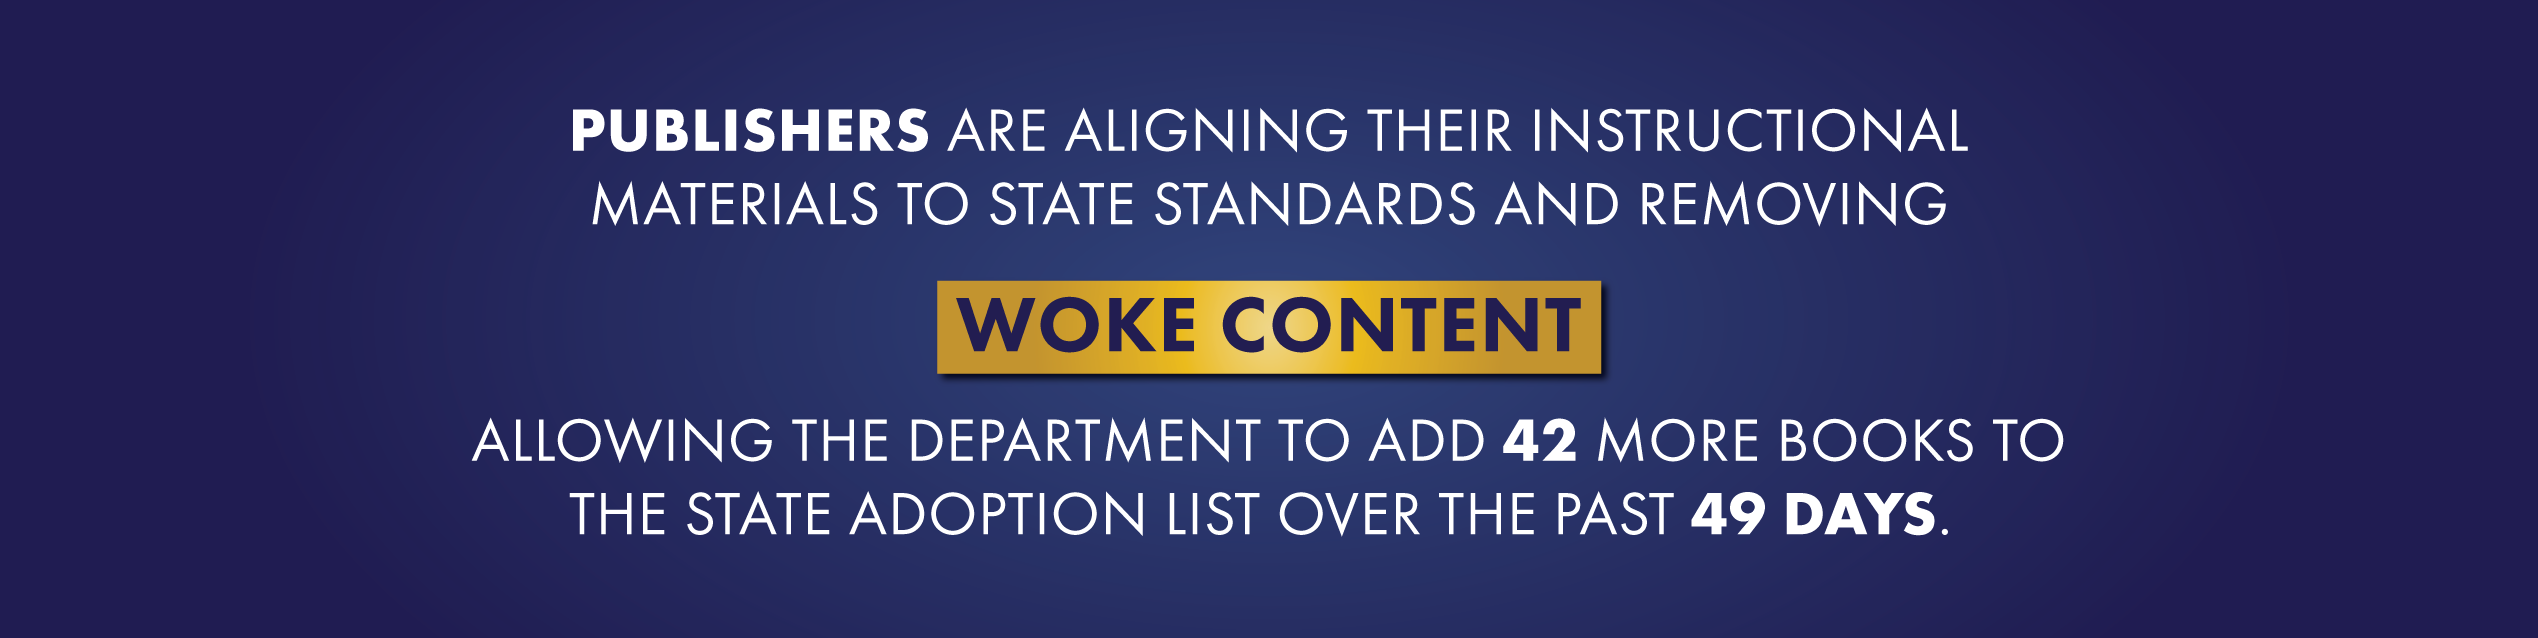 Publishers are aligning their instructional materials to state standards and removing woke content allowing the department to add 42 more books to the state adoption list over the past 49 days. 